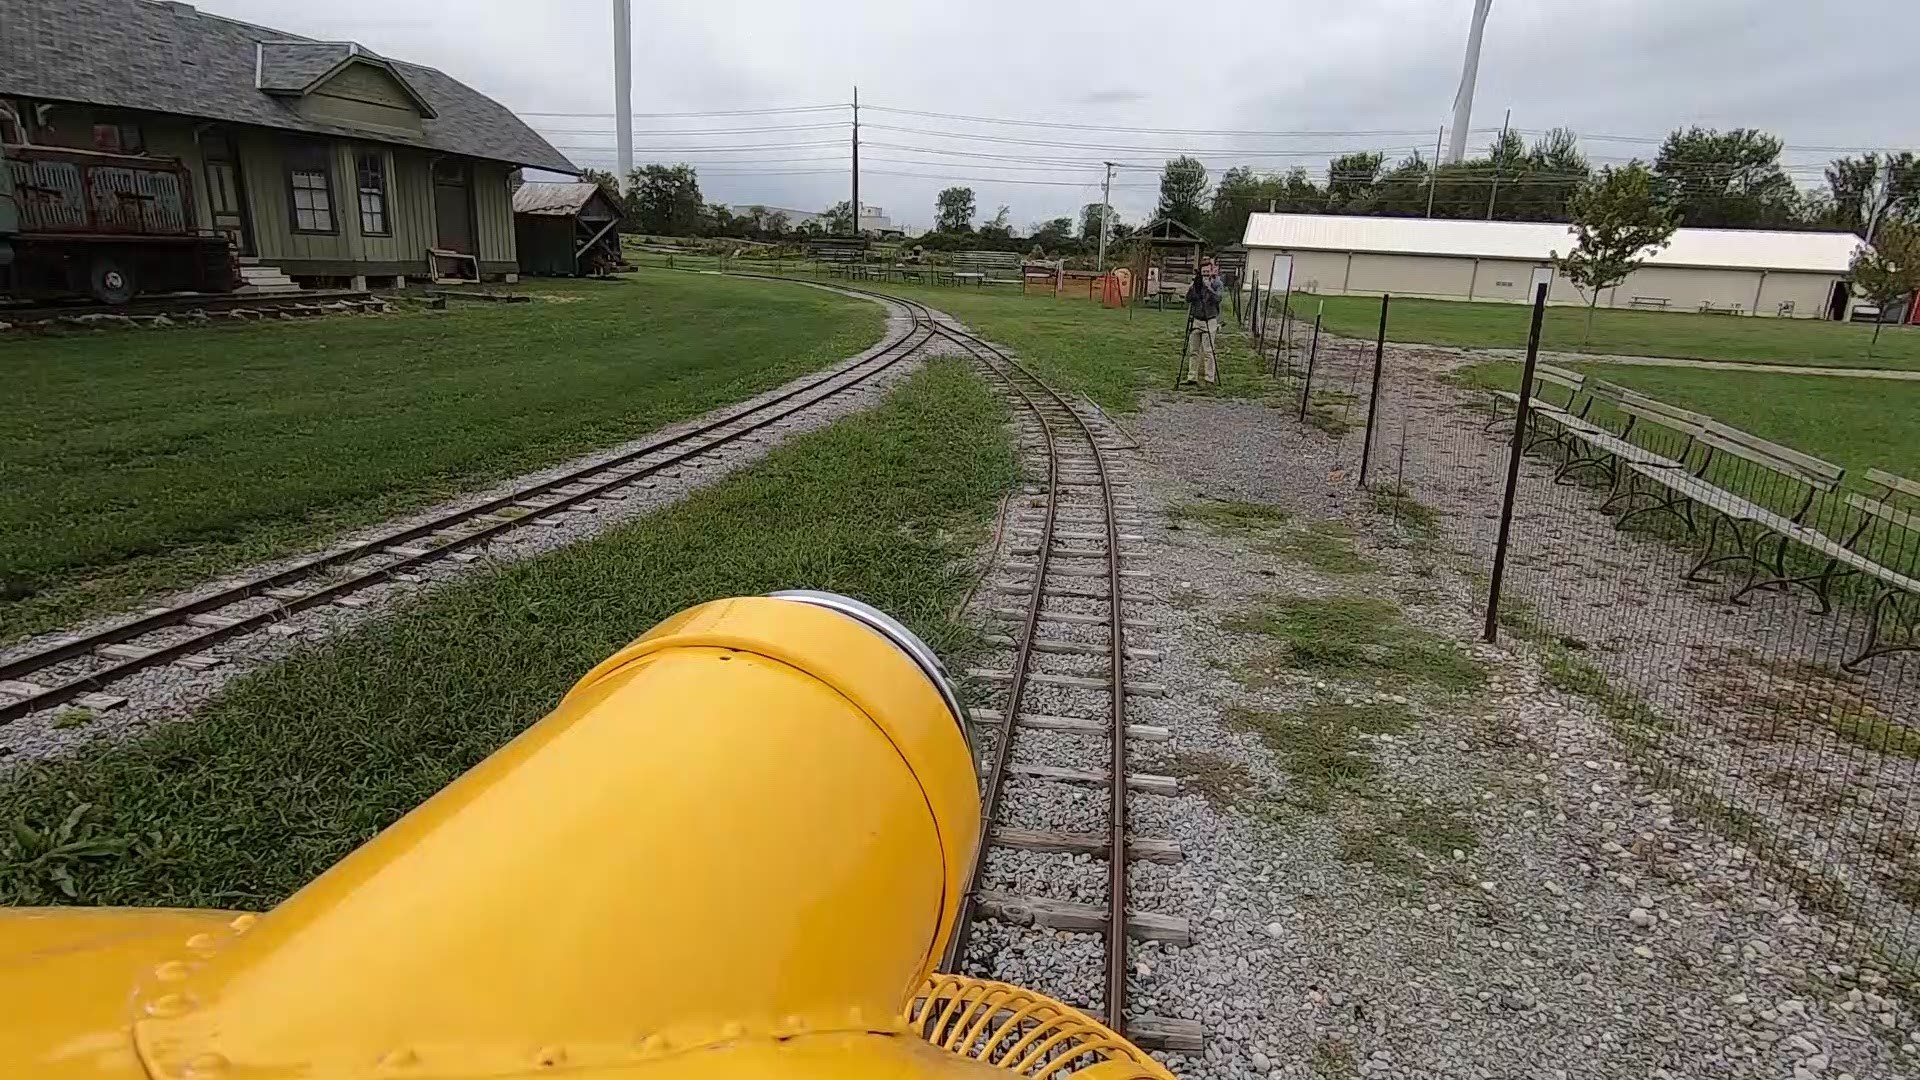 Each ticket for a train ride takes you around the 1/4 mile track twice